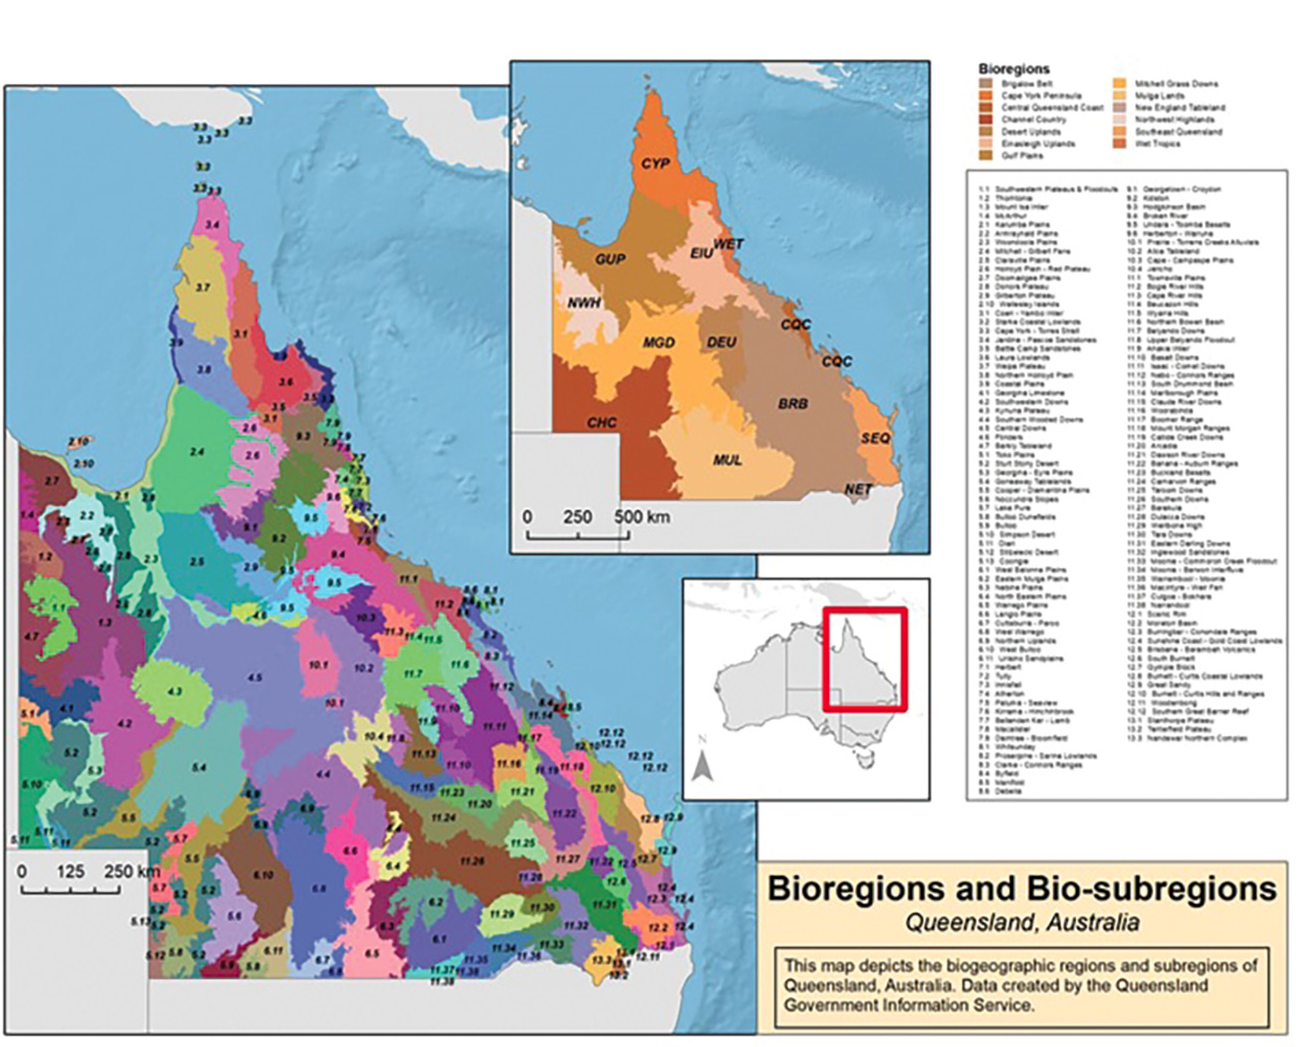 Map of bioregions and bio-subregions in Queensland, Australia (produced with ArcGIS Desktop; Law and Collins 2018).